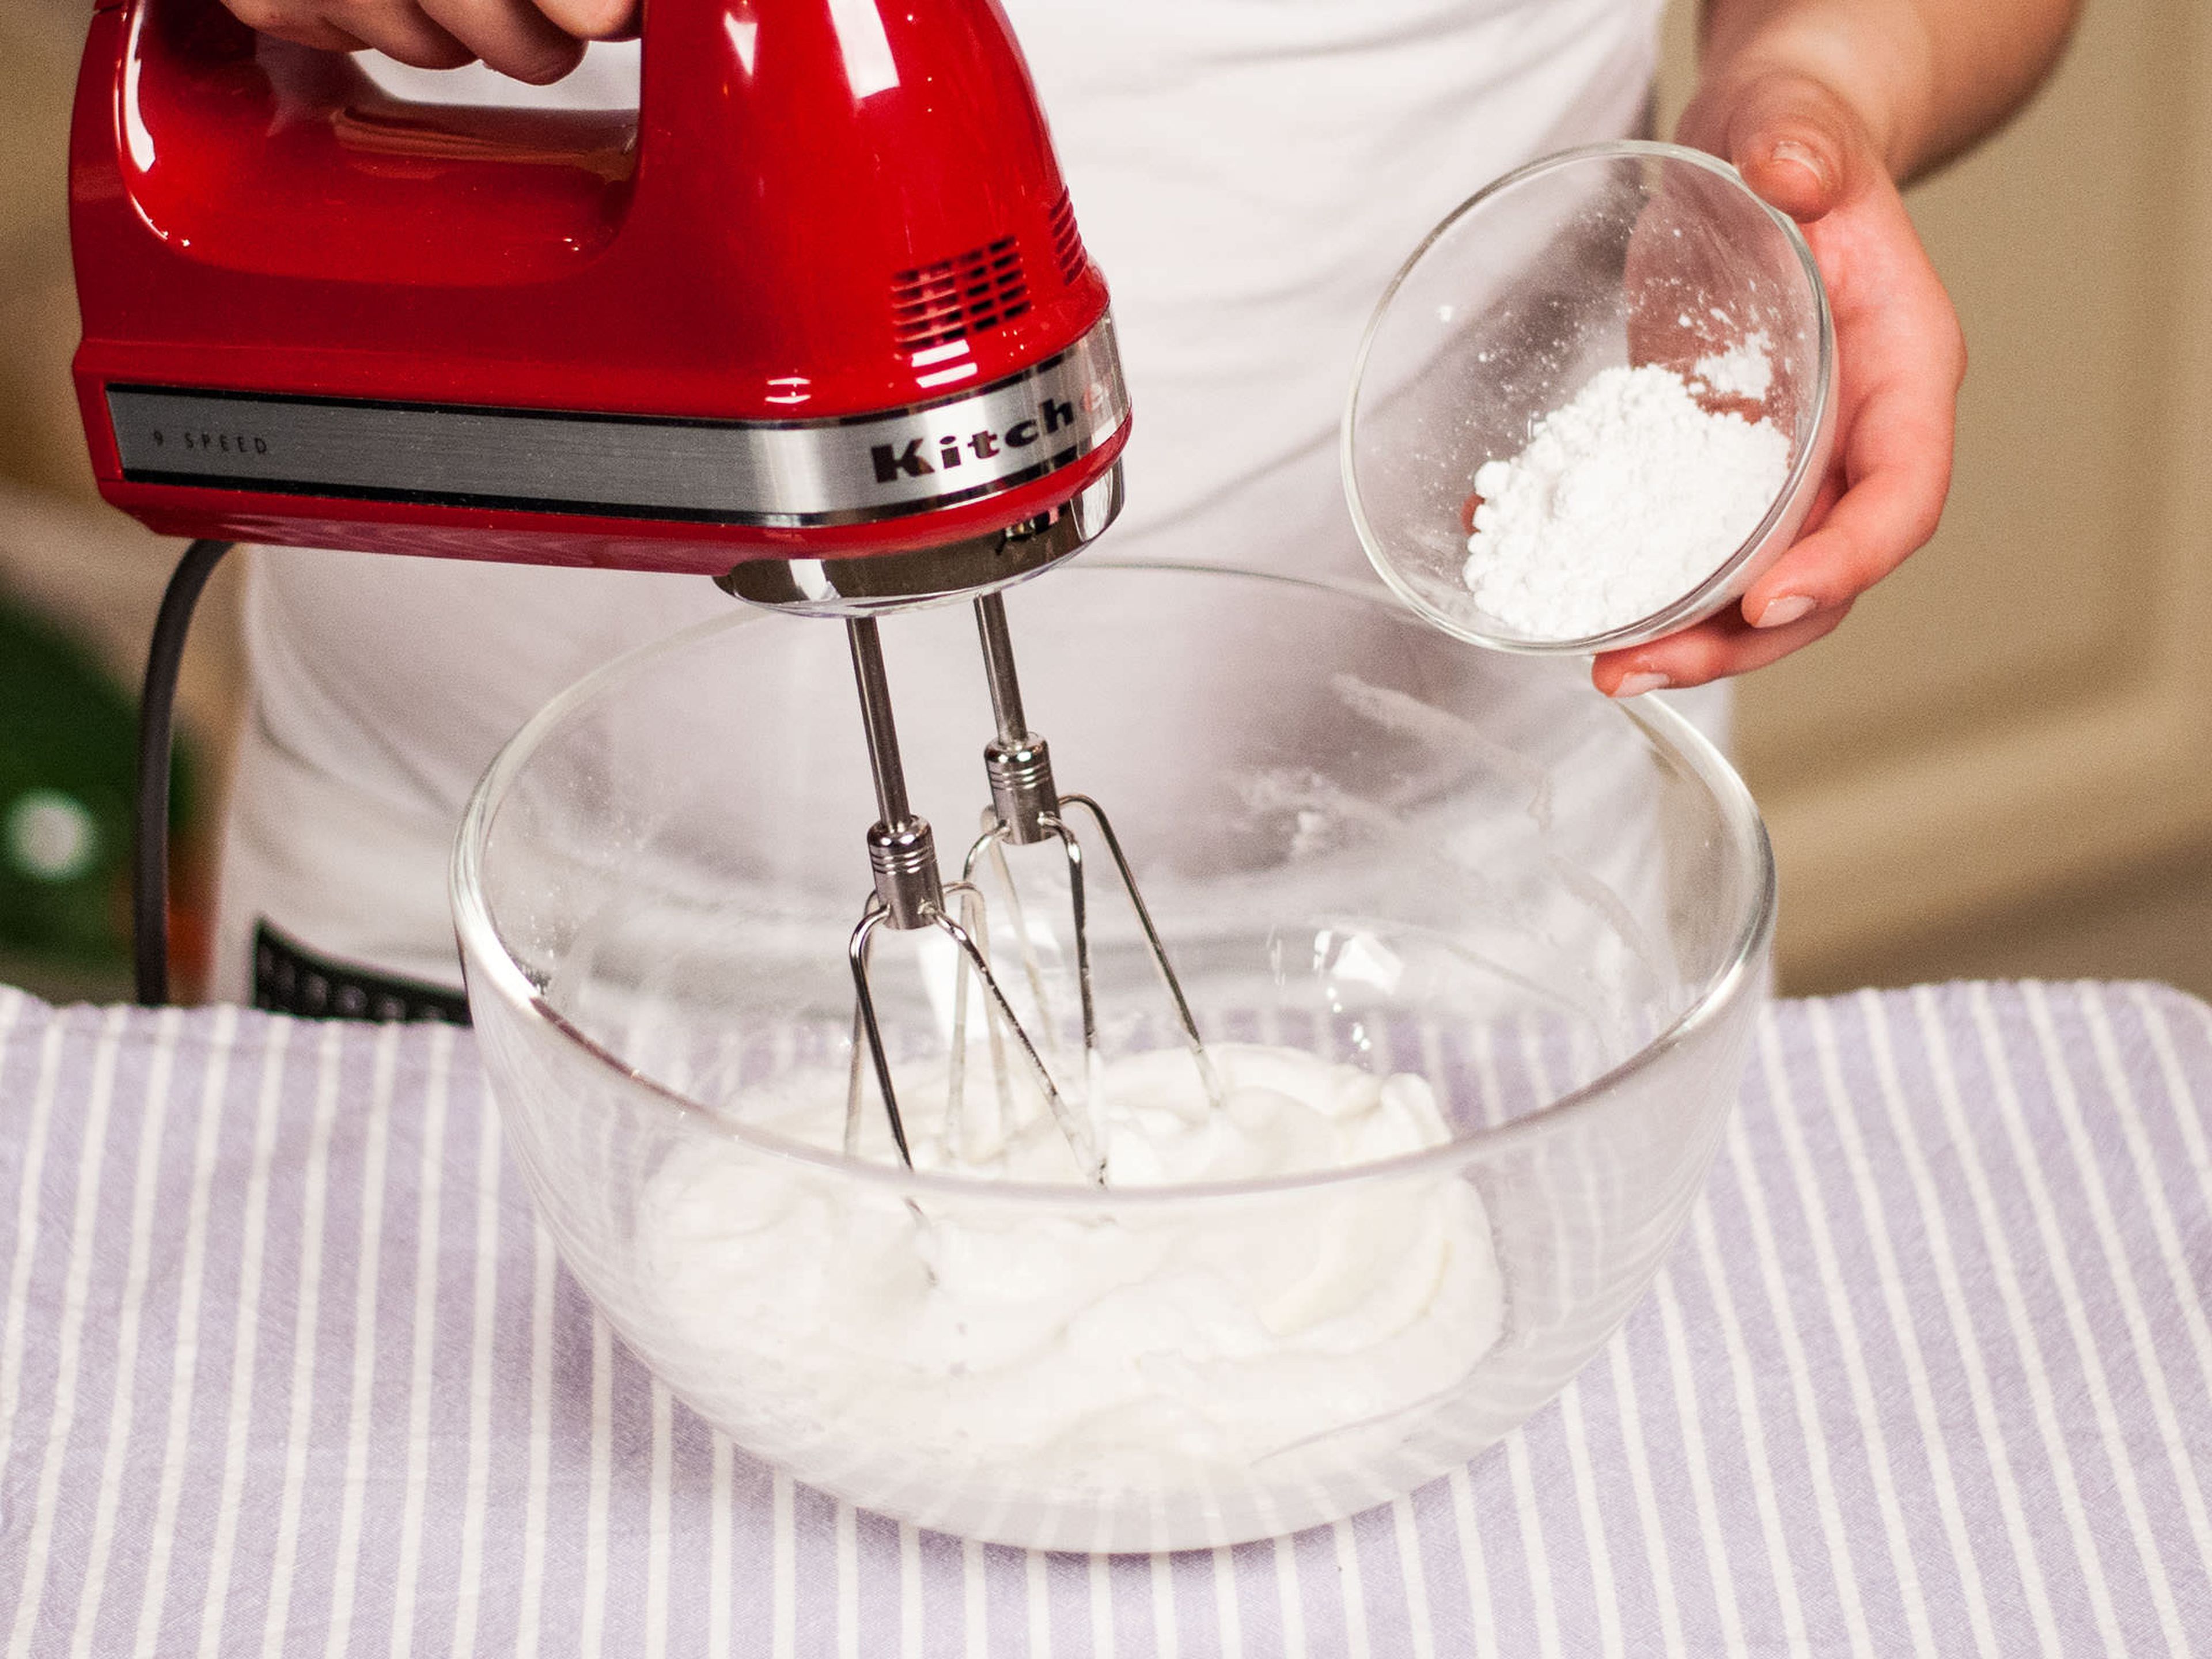 For the cream cheese topping, whisk together cream cheese, melted butter, lemon juice, and remaining vanilla extract until smooth. Then stir in confectioner’s sugar little by little. Frost cooled cake with the topping and serve with some whipped cream to taste.